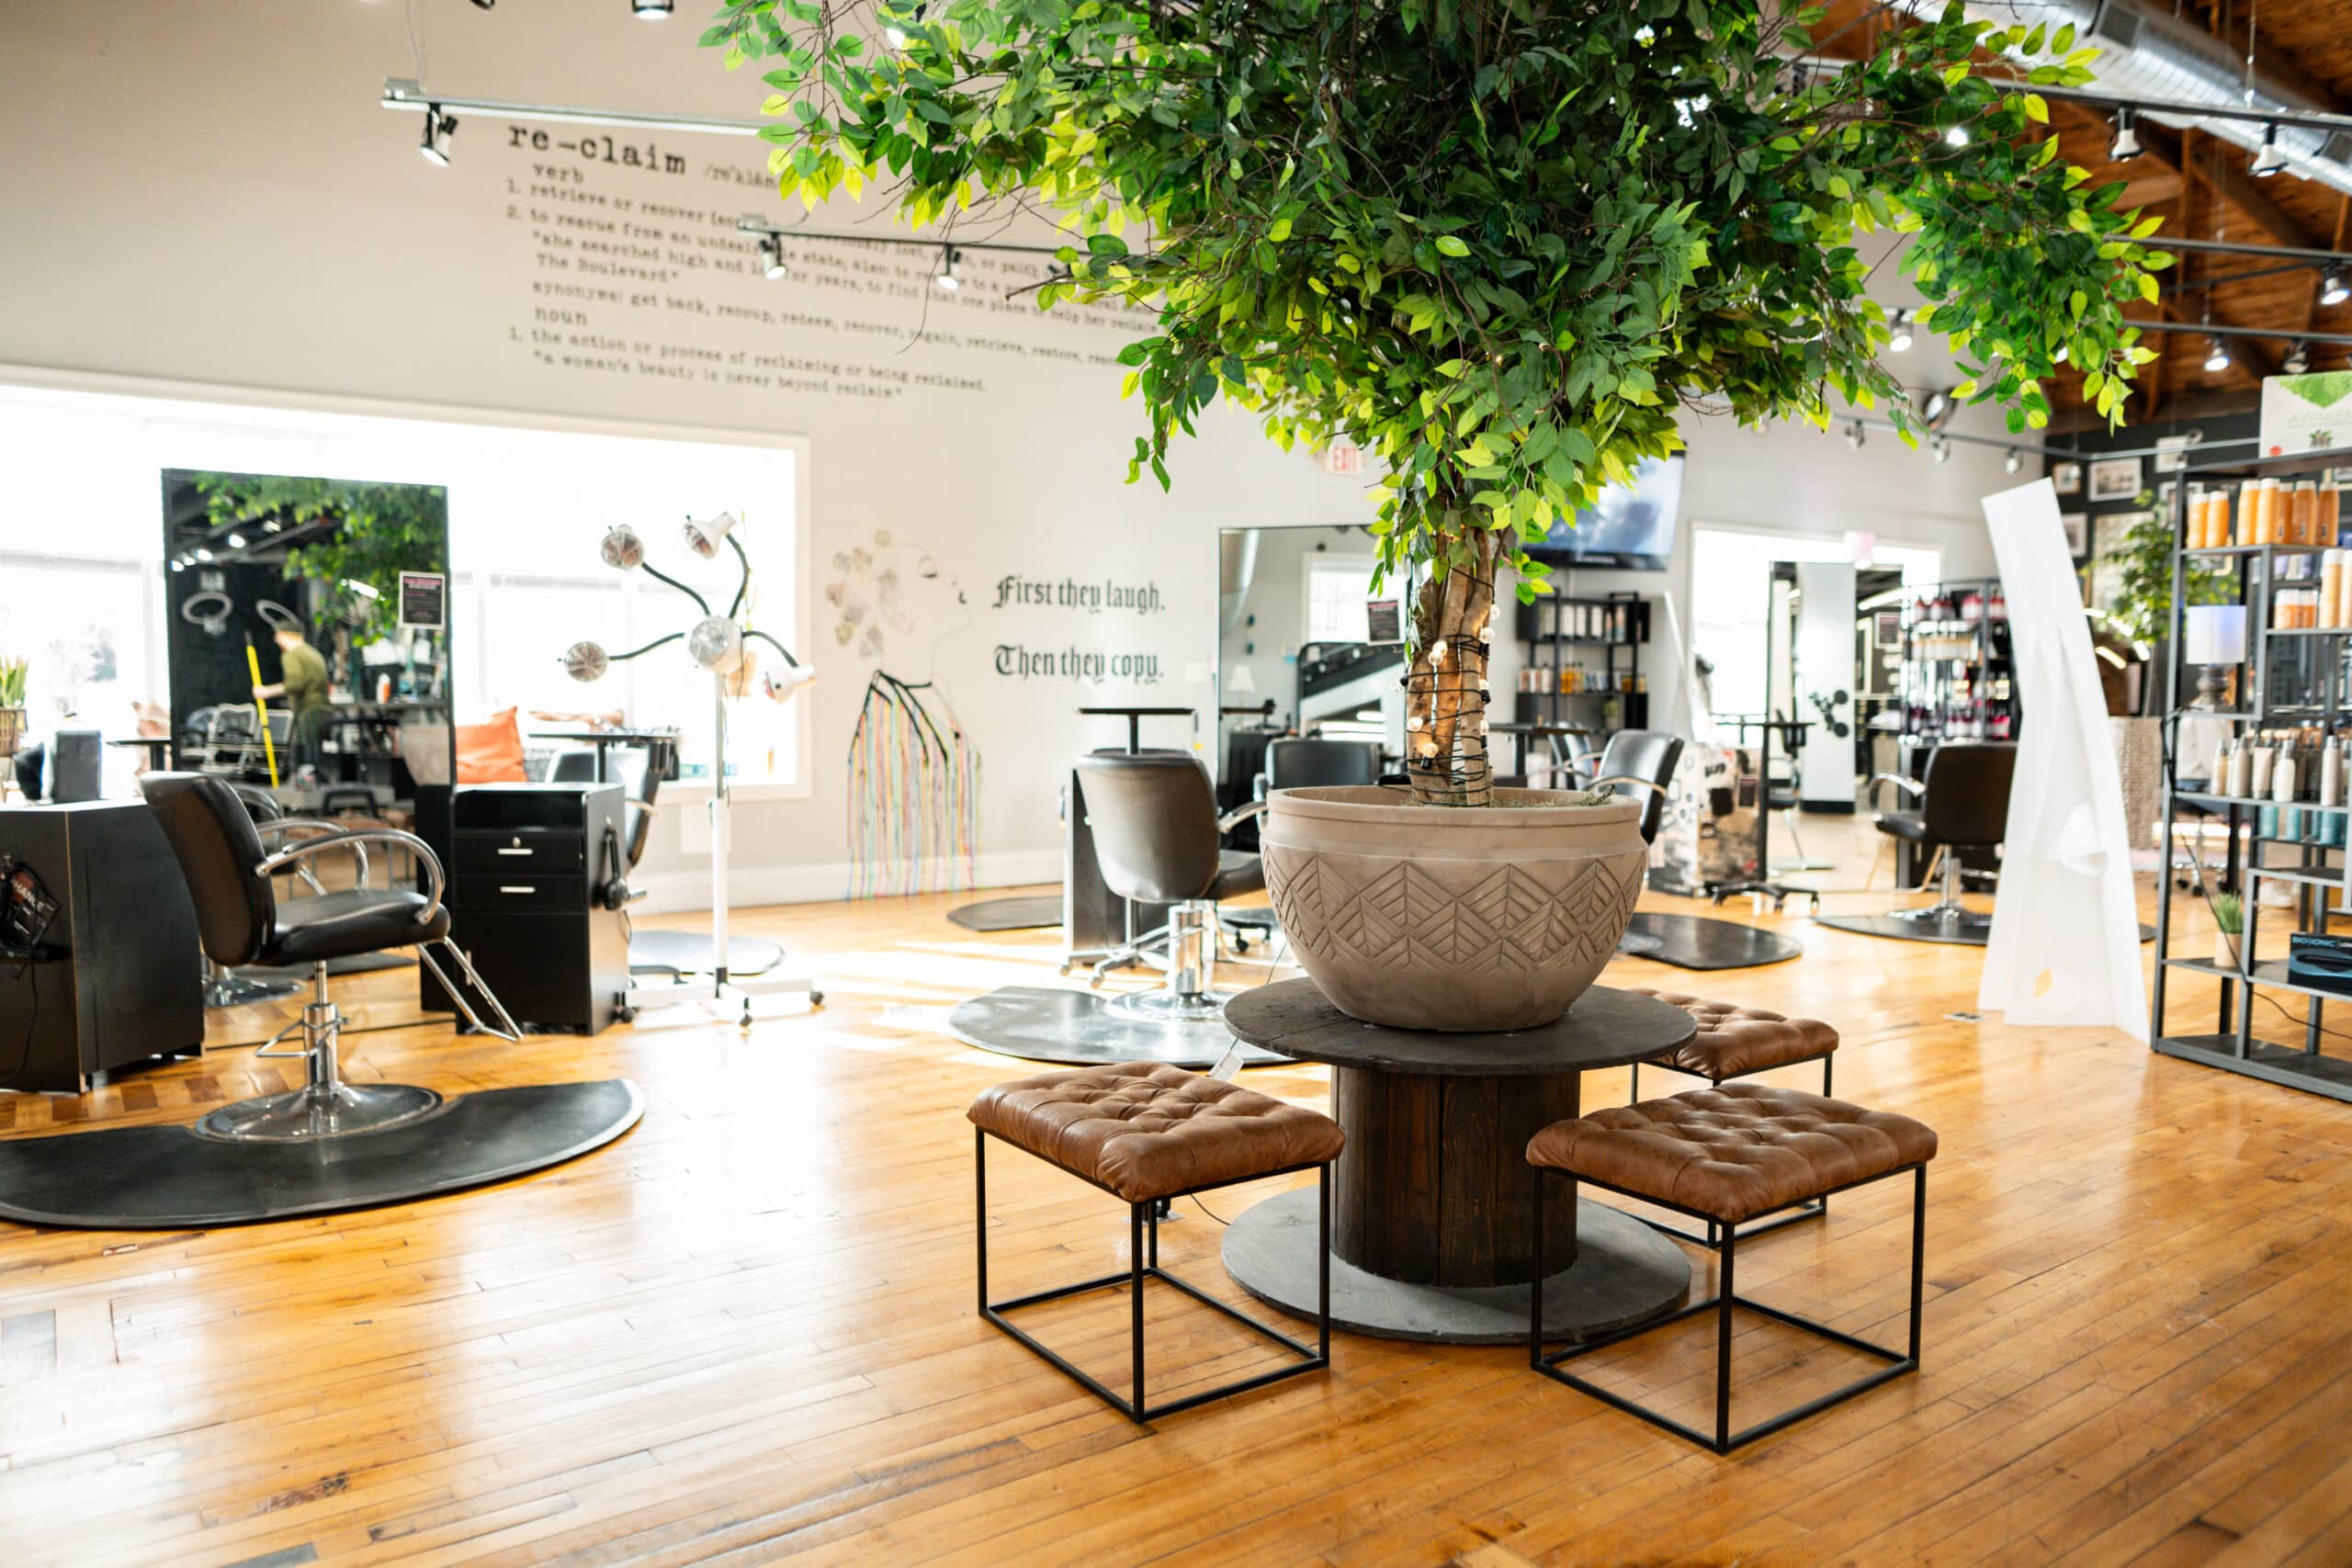 Interior of The Boulevard Hair Company salon featuring polished wooden floors, modern black salon chairs, a large potted tree centerpiece, and walls with inspiring quotes. The salon's spacious and well-lit environment conveys a welcoming and stylish atmosphere.